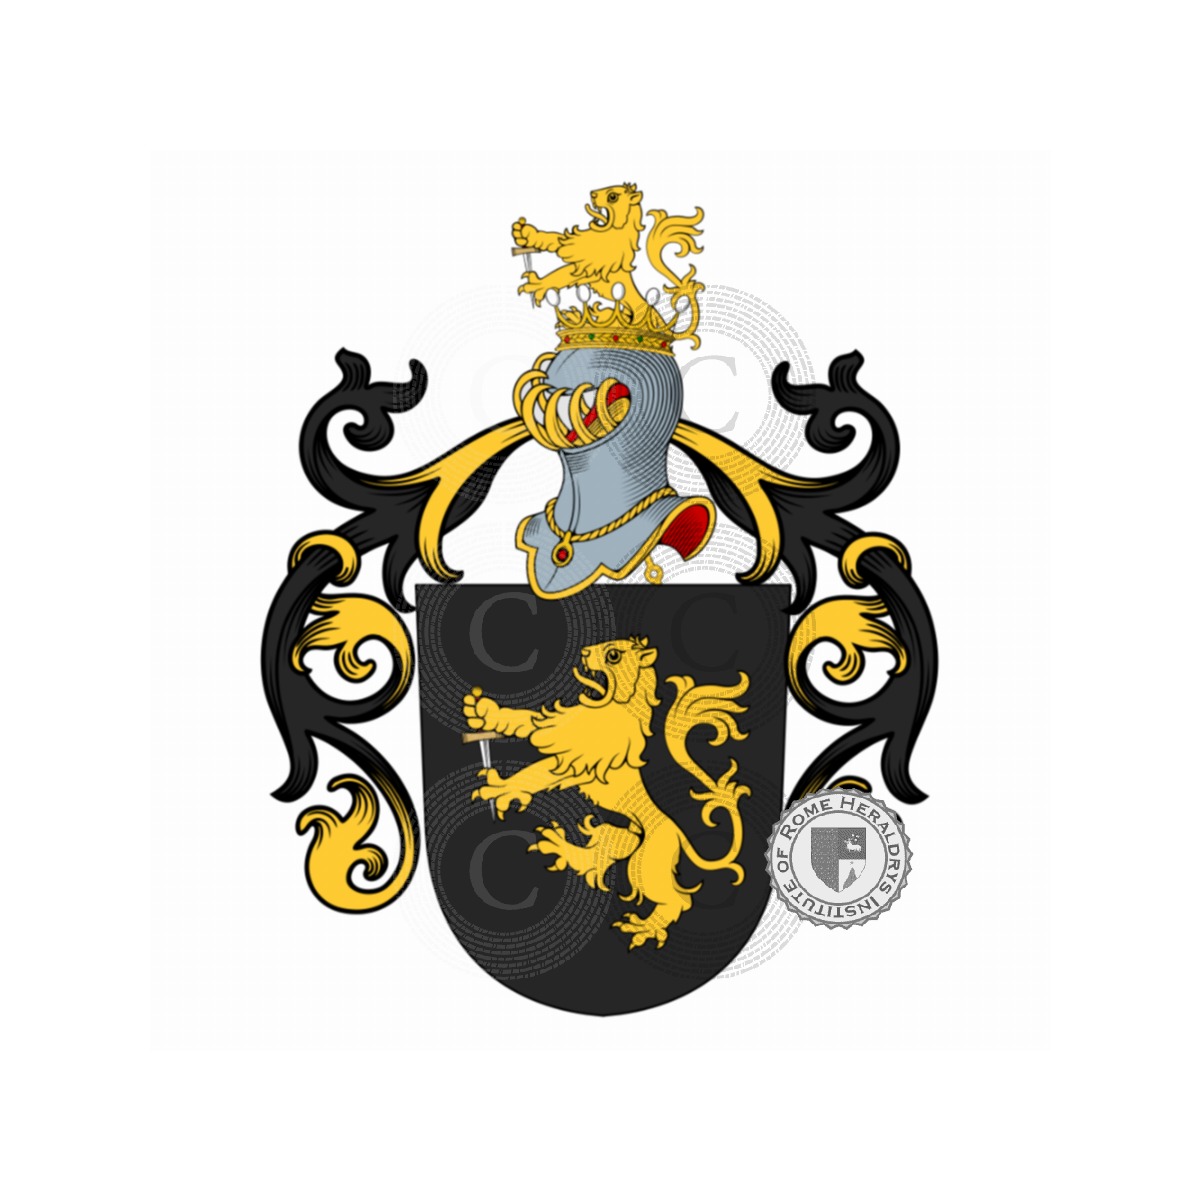 Coat of arms of familyStraub